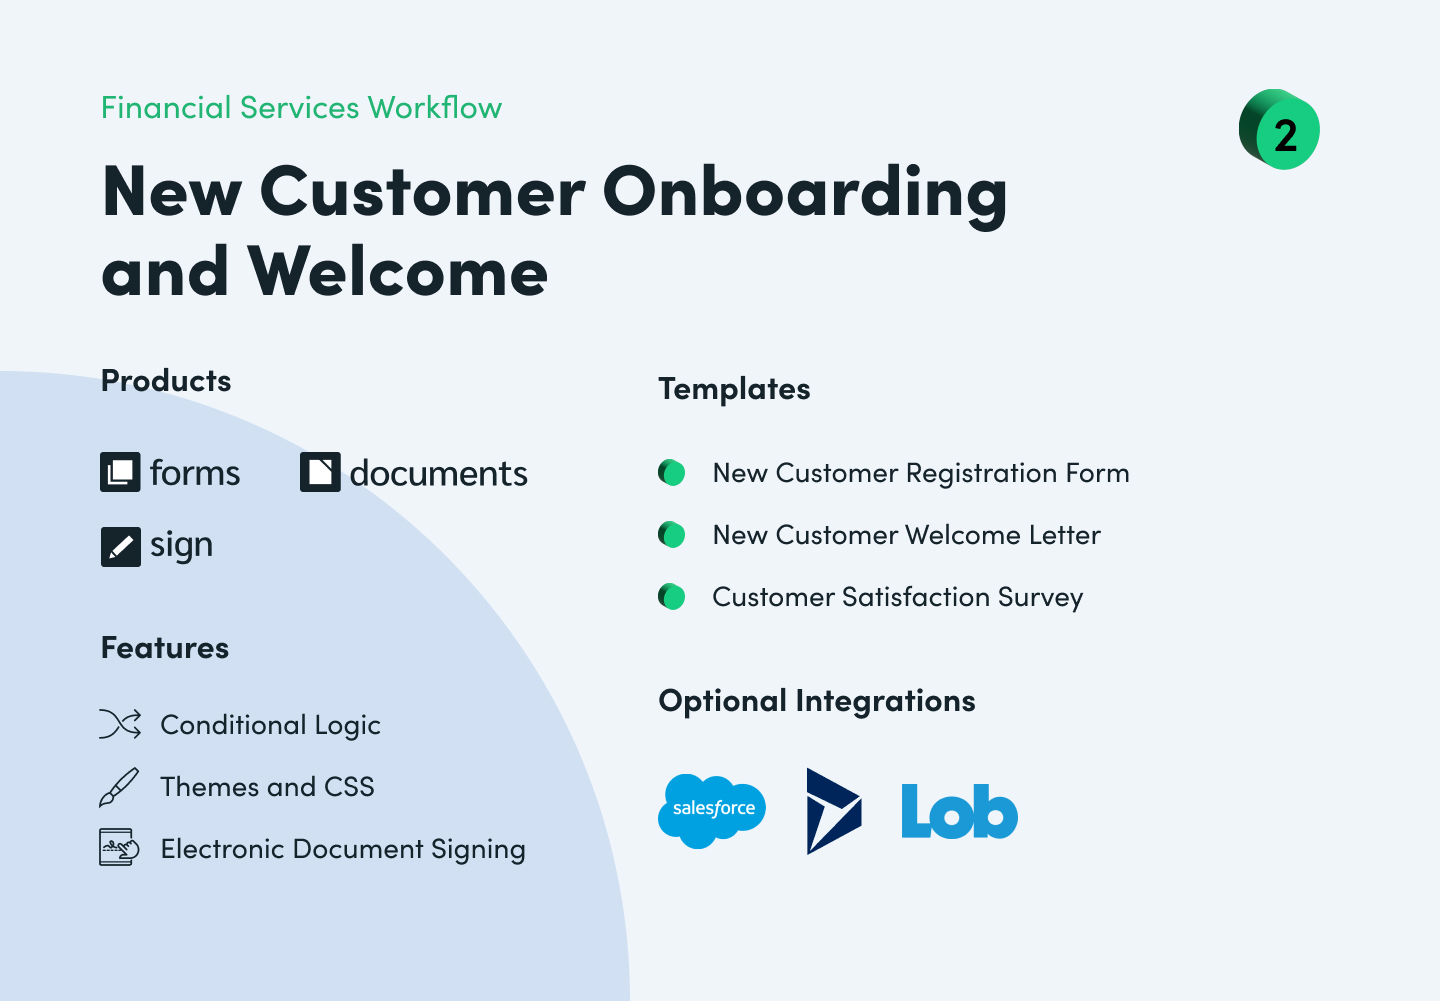 Financial Services New Customer Onboarding and Welcome Workflow Example